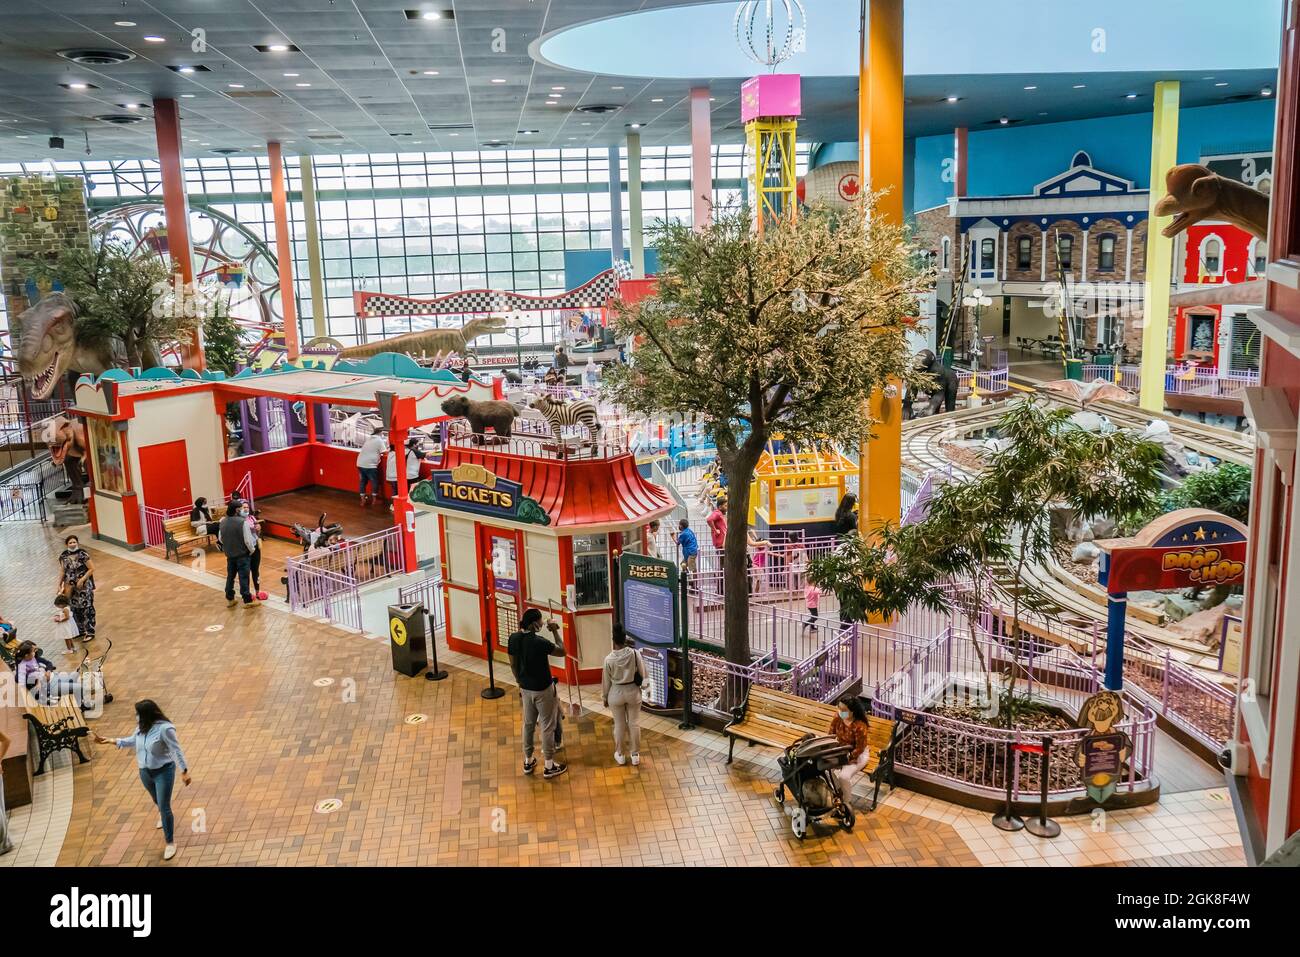 Fantasy fair is the largest indoor amusement park in Toronto Ontario Canada and it is located inside woodbine shopping mall Stock Photo